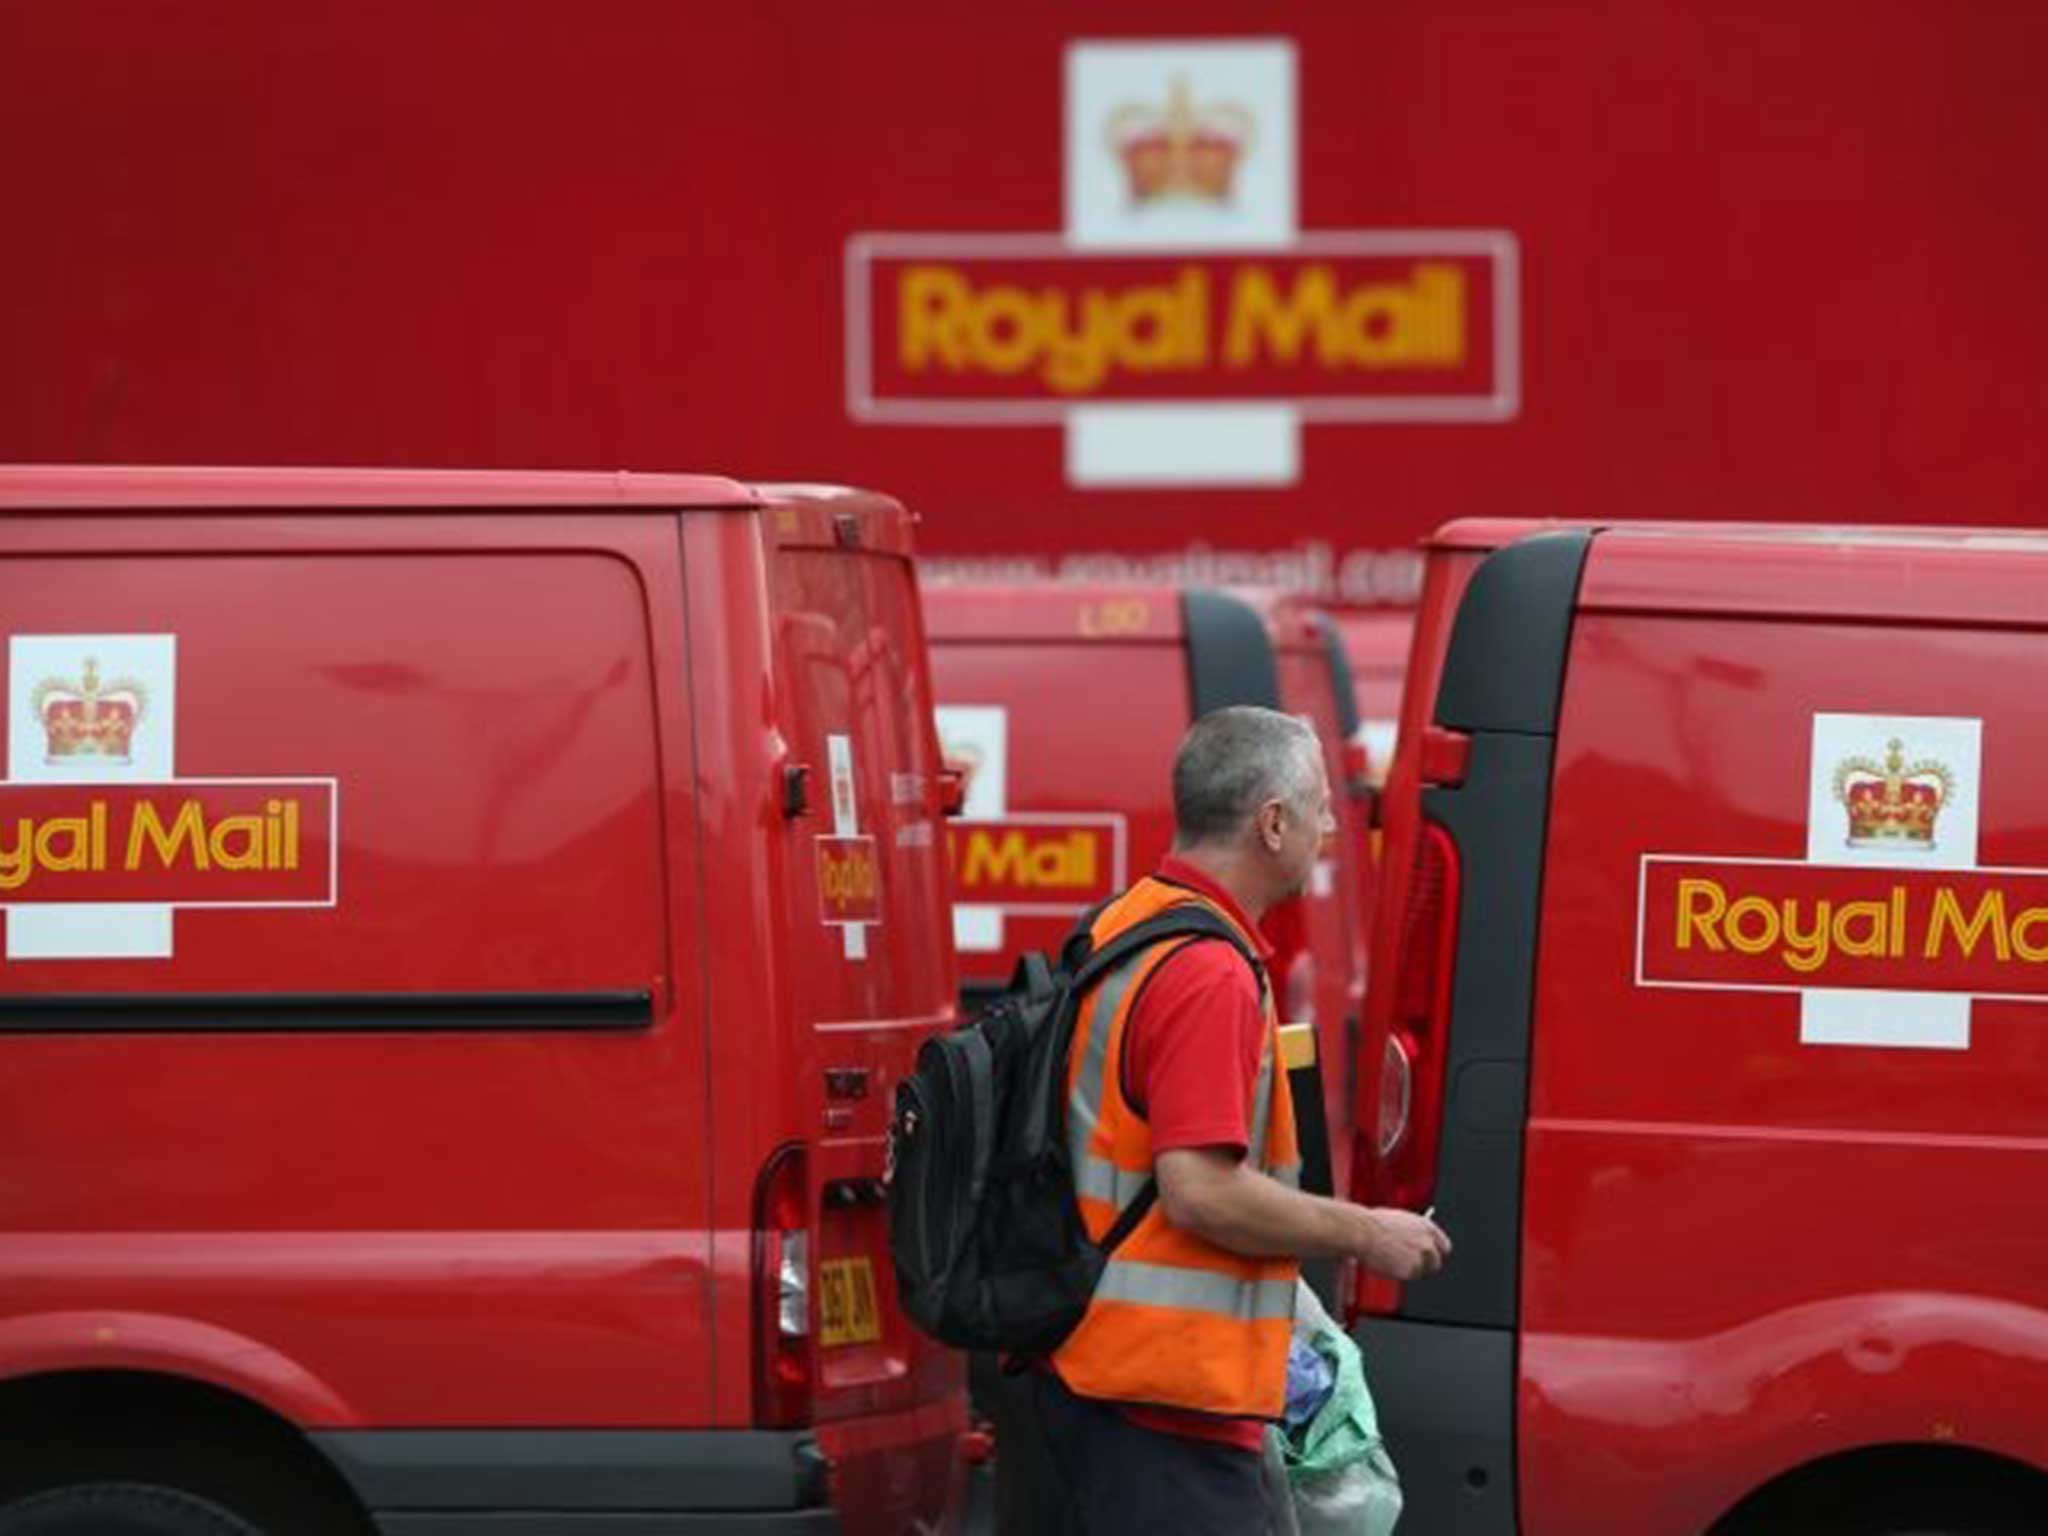 Royal Mail had to set aside £18 million